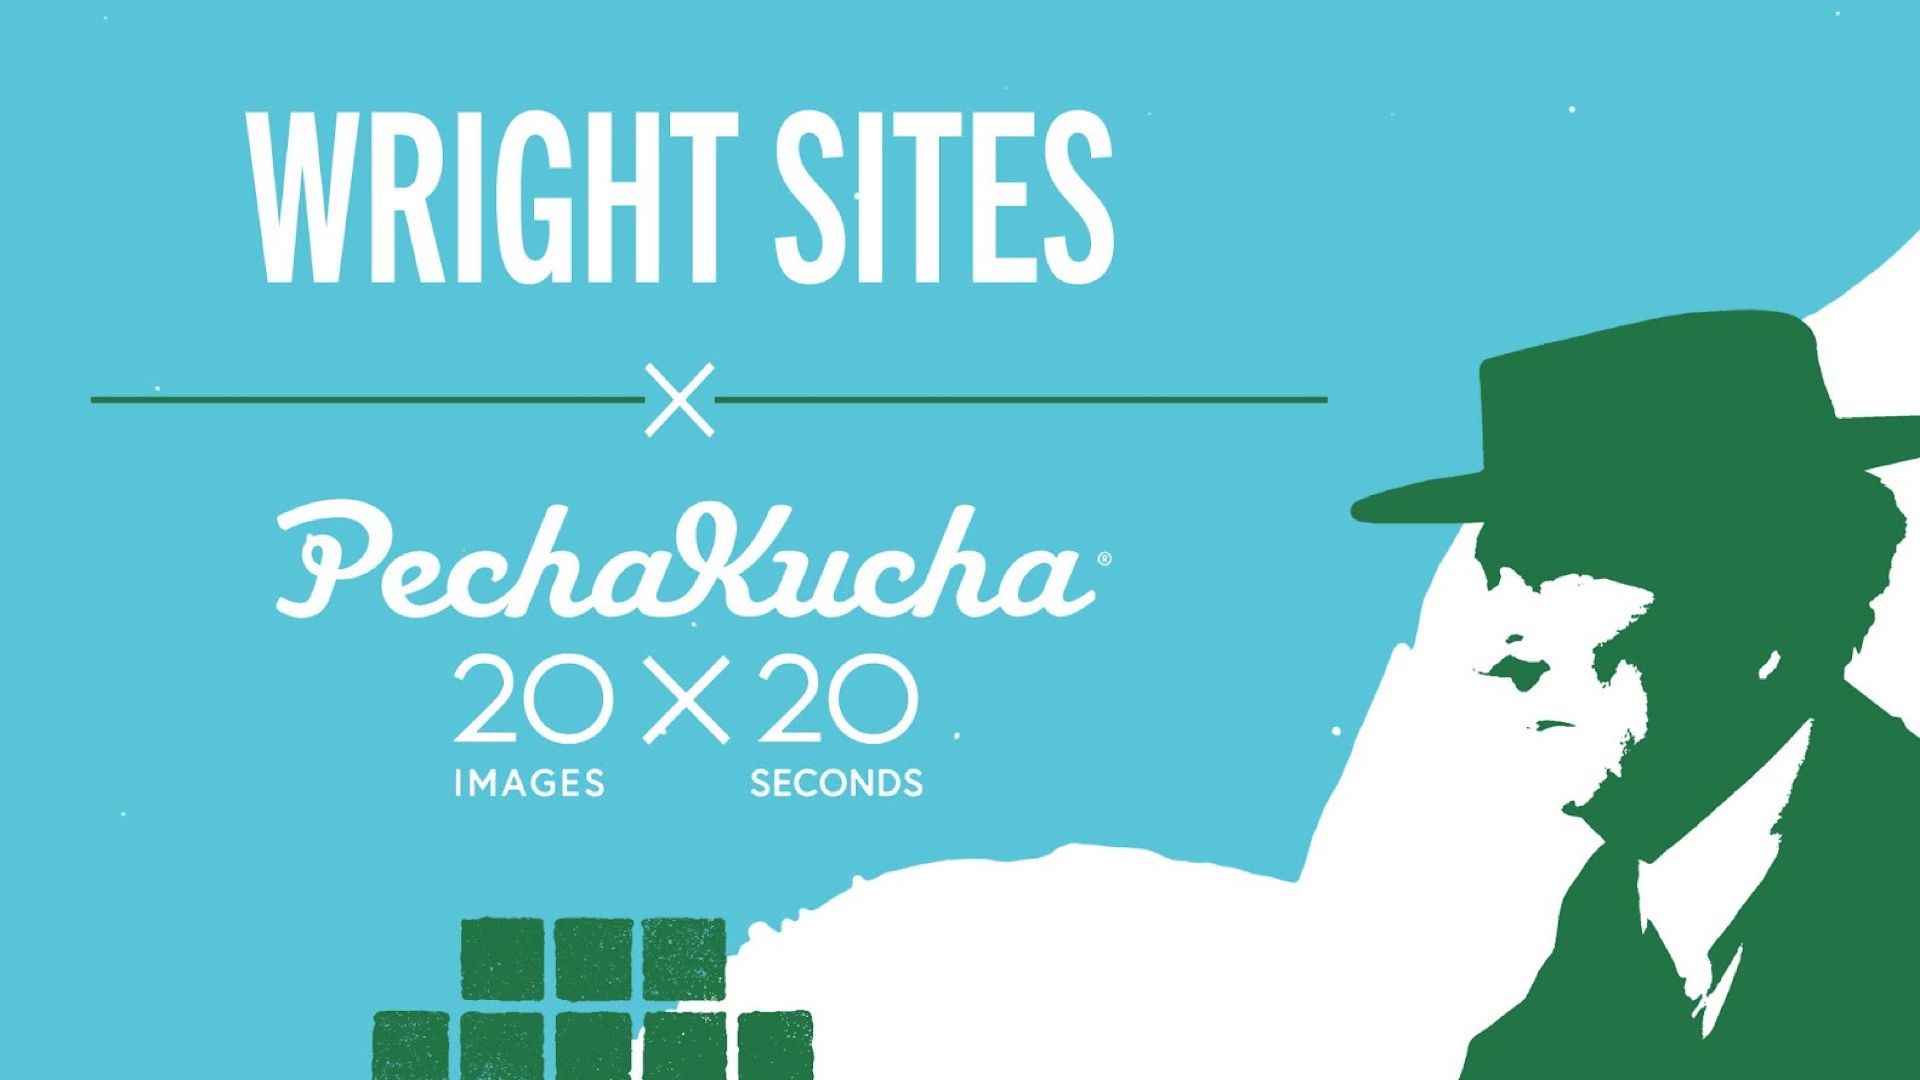 Promotional image for PechaKucha with Wright's profile, and 20 slides X 20 seconds